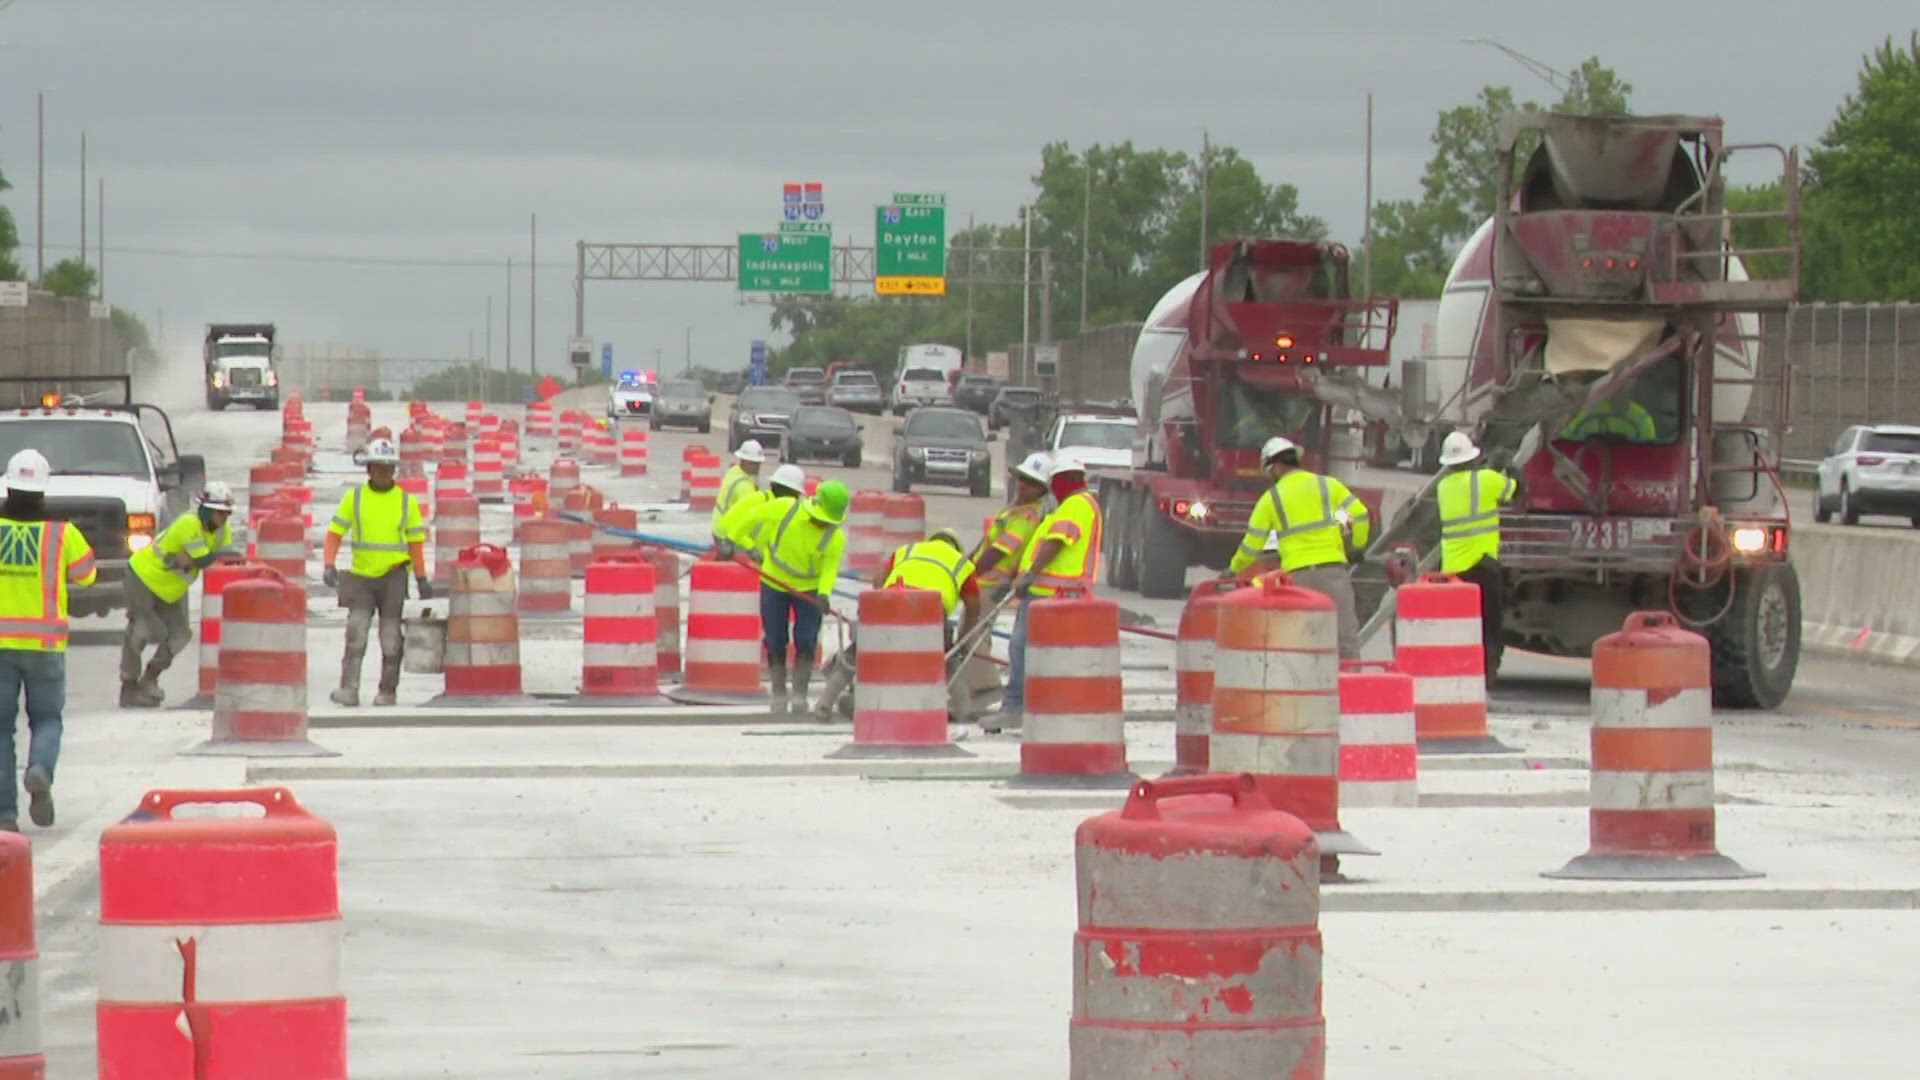 The northbound lanes of I-465 between I-65 and I-70 will close for several weeks starting on or after July 12.